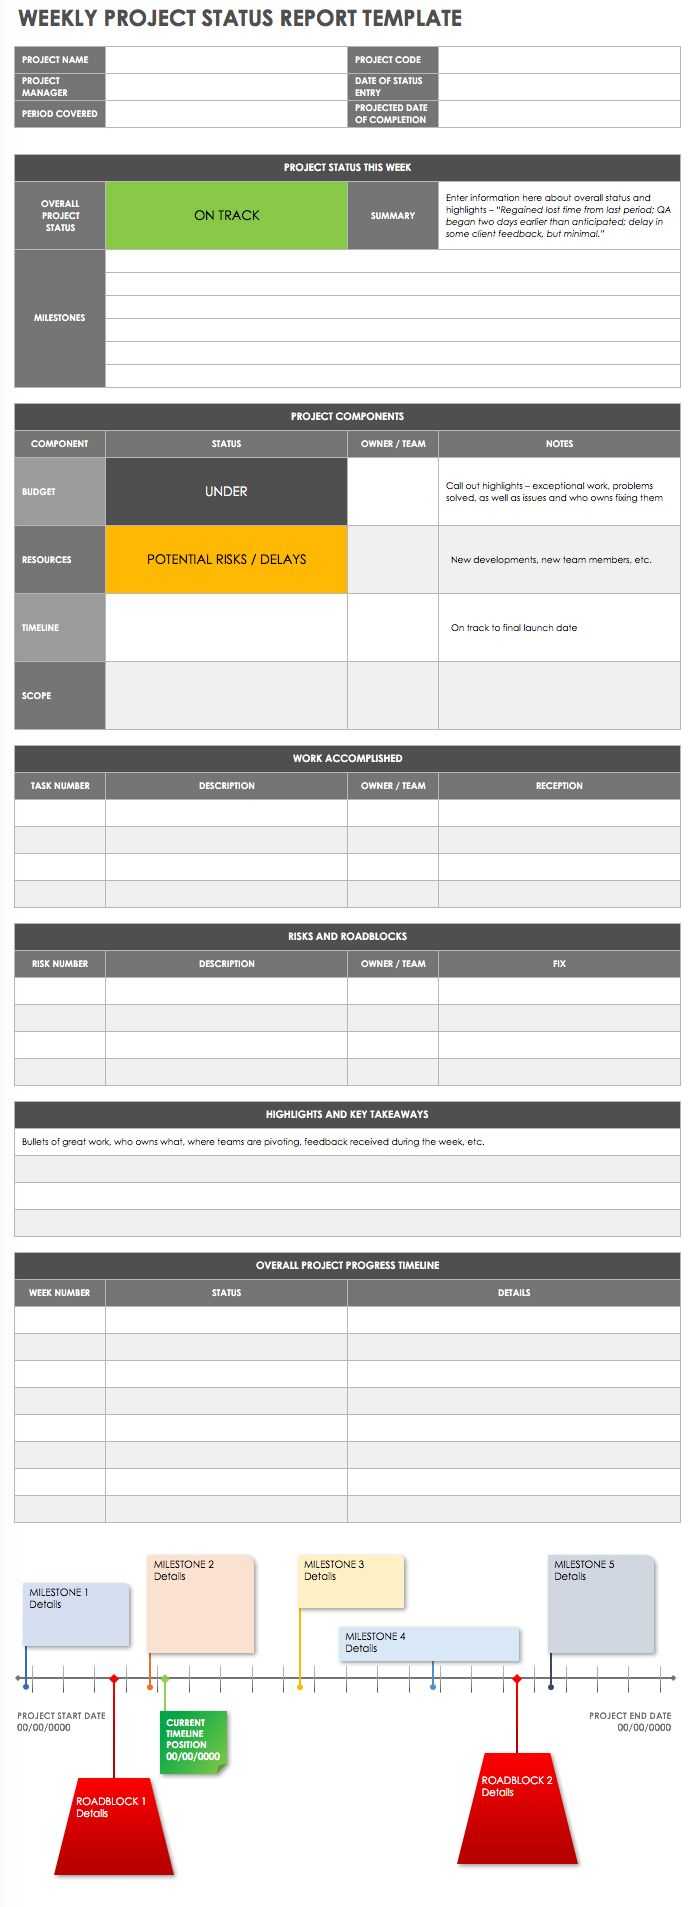 Weekly Project Status Report Sample - Falep.midnightpig.co With One Page Project Status Report Template